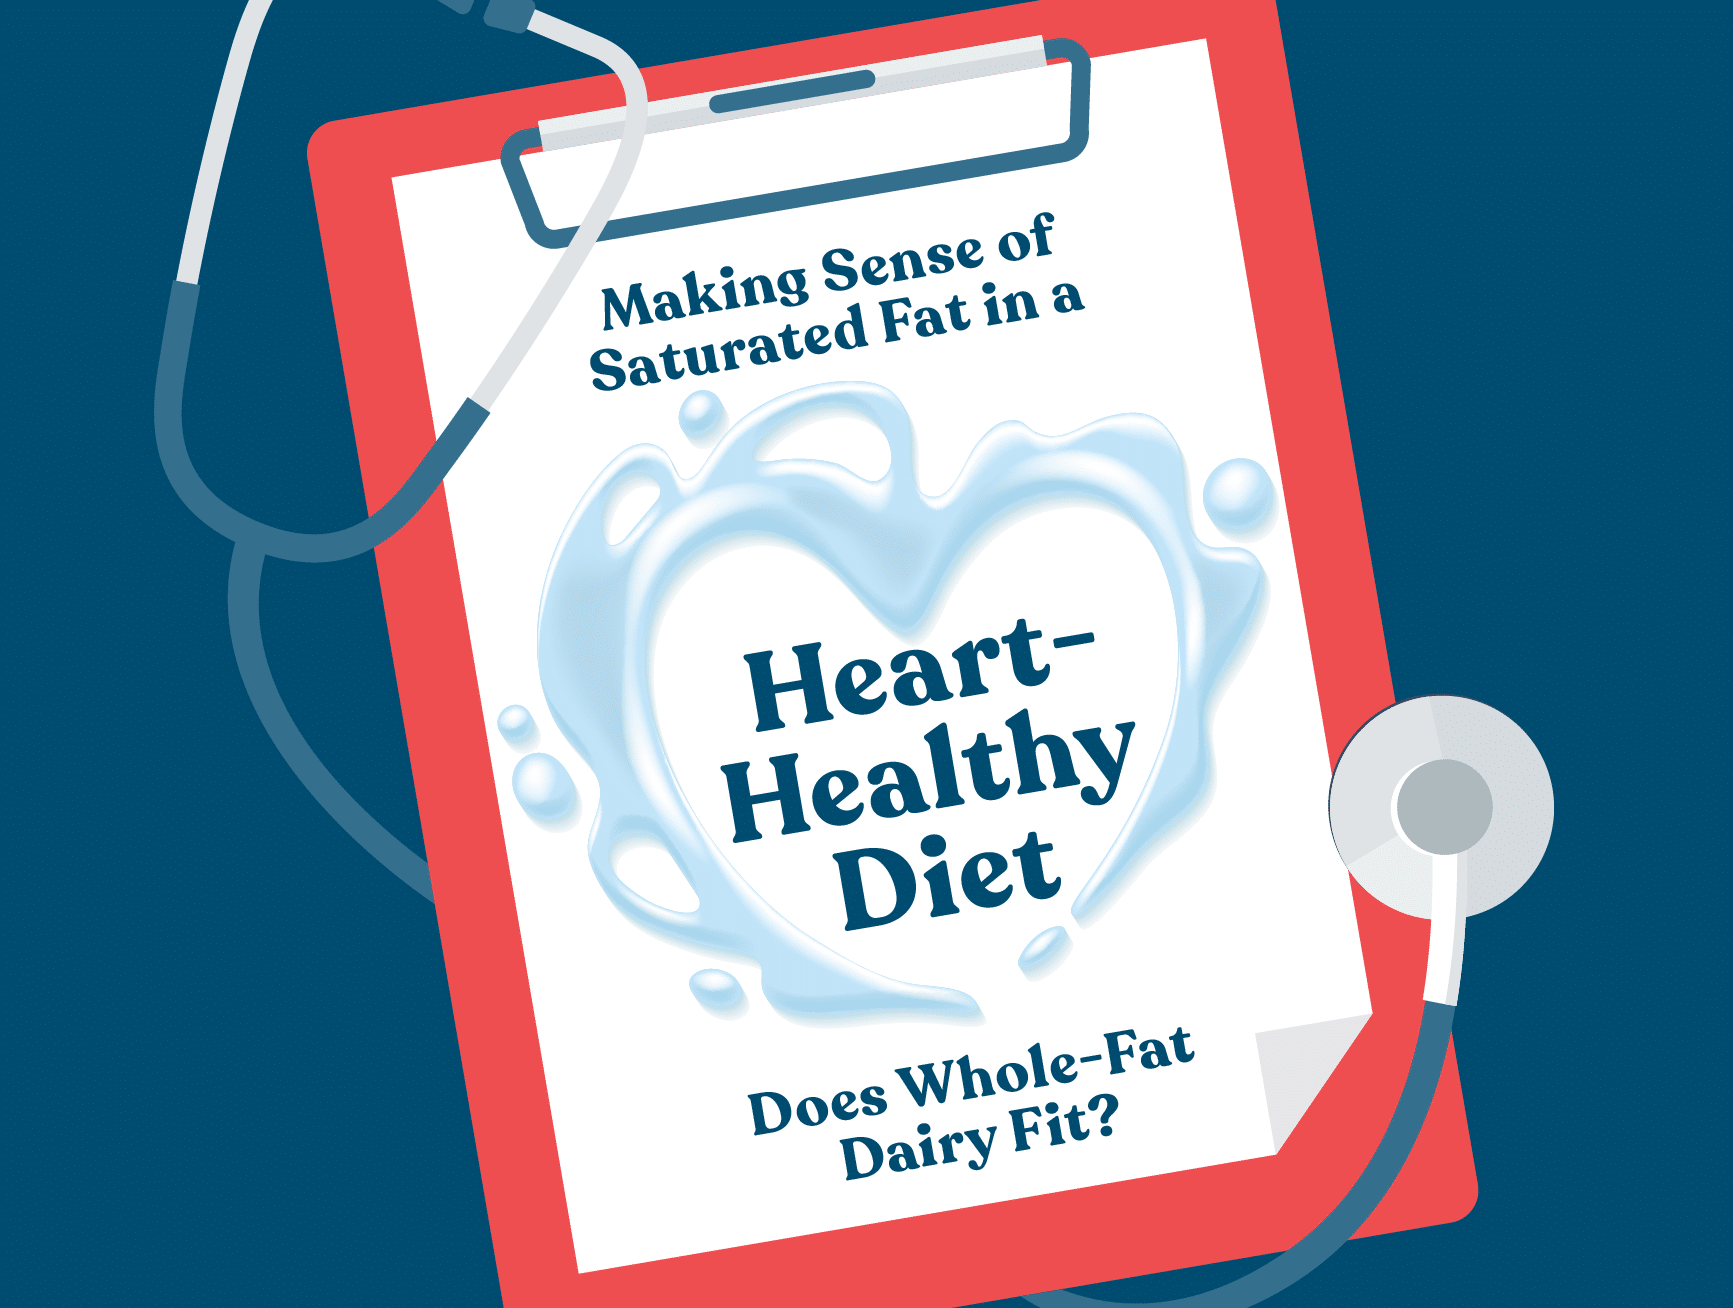 Upcoming Webinar: Making Sense of Saturated Fat in a Heart-Healthy Diet